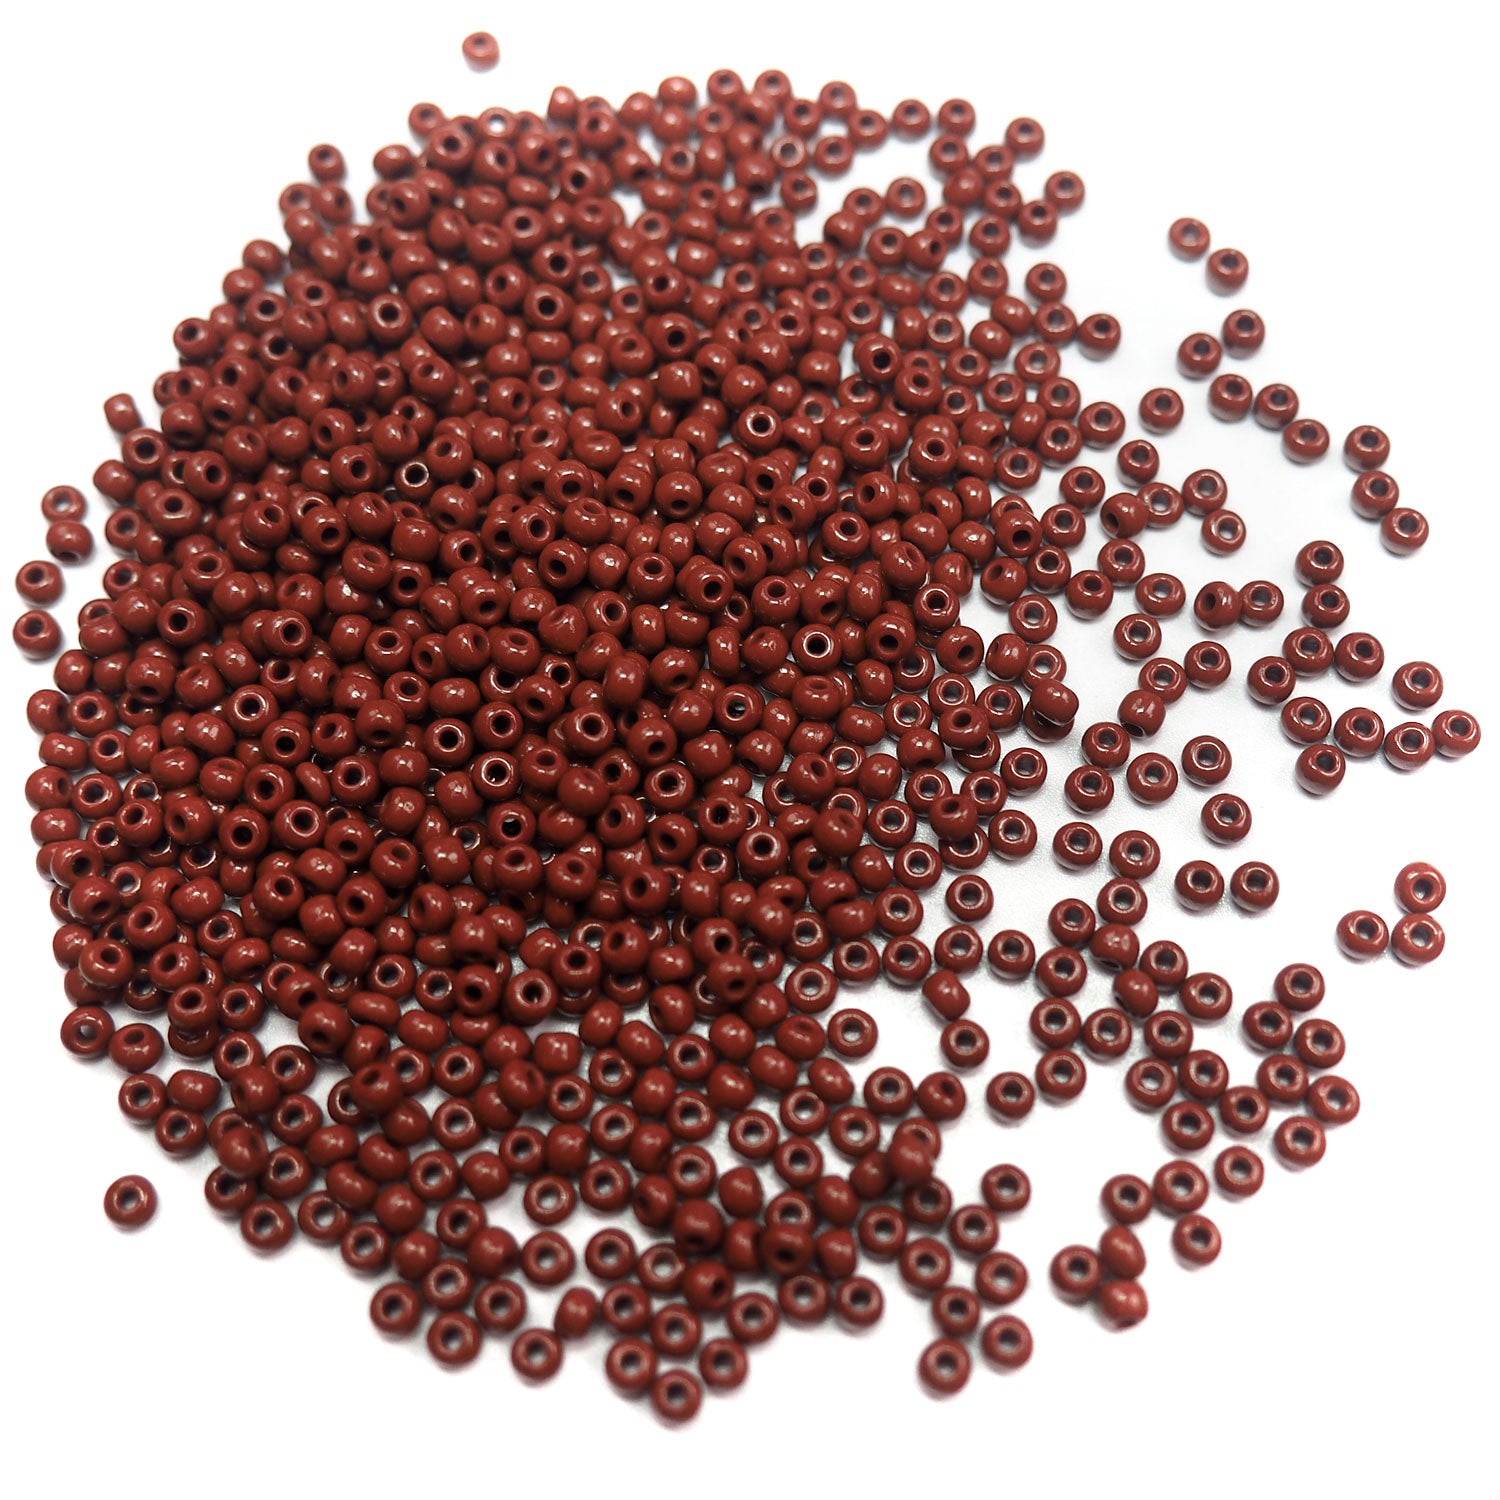 Rocailles size 9/0 (2.6mm) Brown Opaque, Preciosa Ornela Traditional Czech Glass Seed Beads, 30grams (1 oz), P944